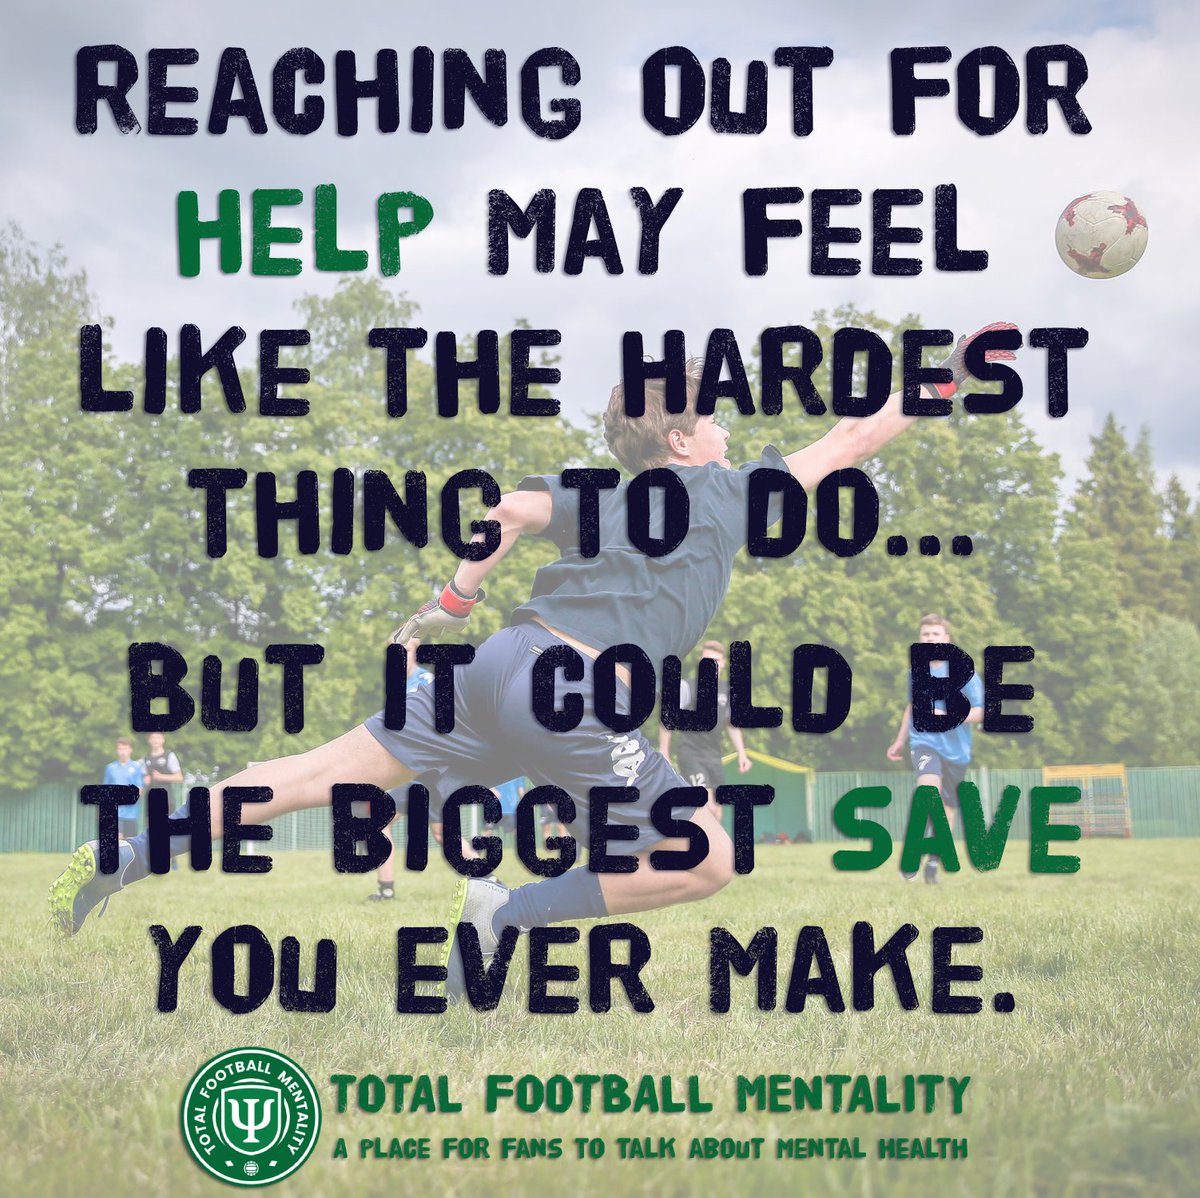 Your life is worth saving. There are people who want to be there for you and keep you in the game. Reach out and ask for help. You are worth it.

My DMs are always open.

#MentalHealth ⚽️ #AskForHelp ⚽️ #YouAreWorthIt